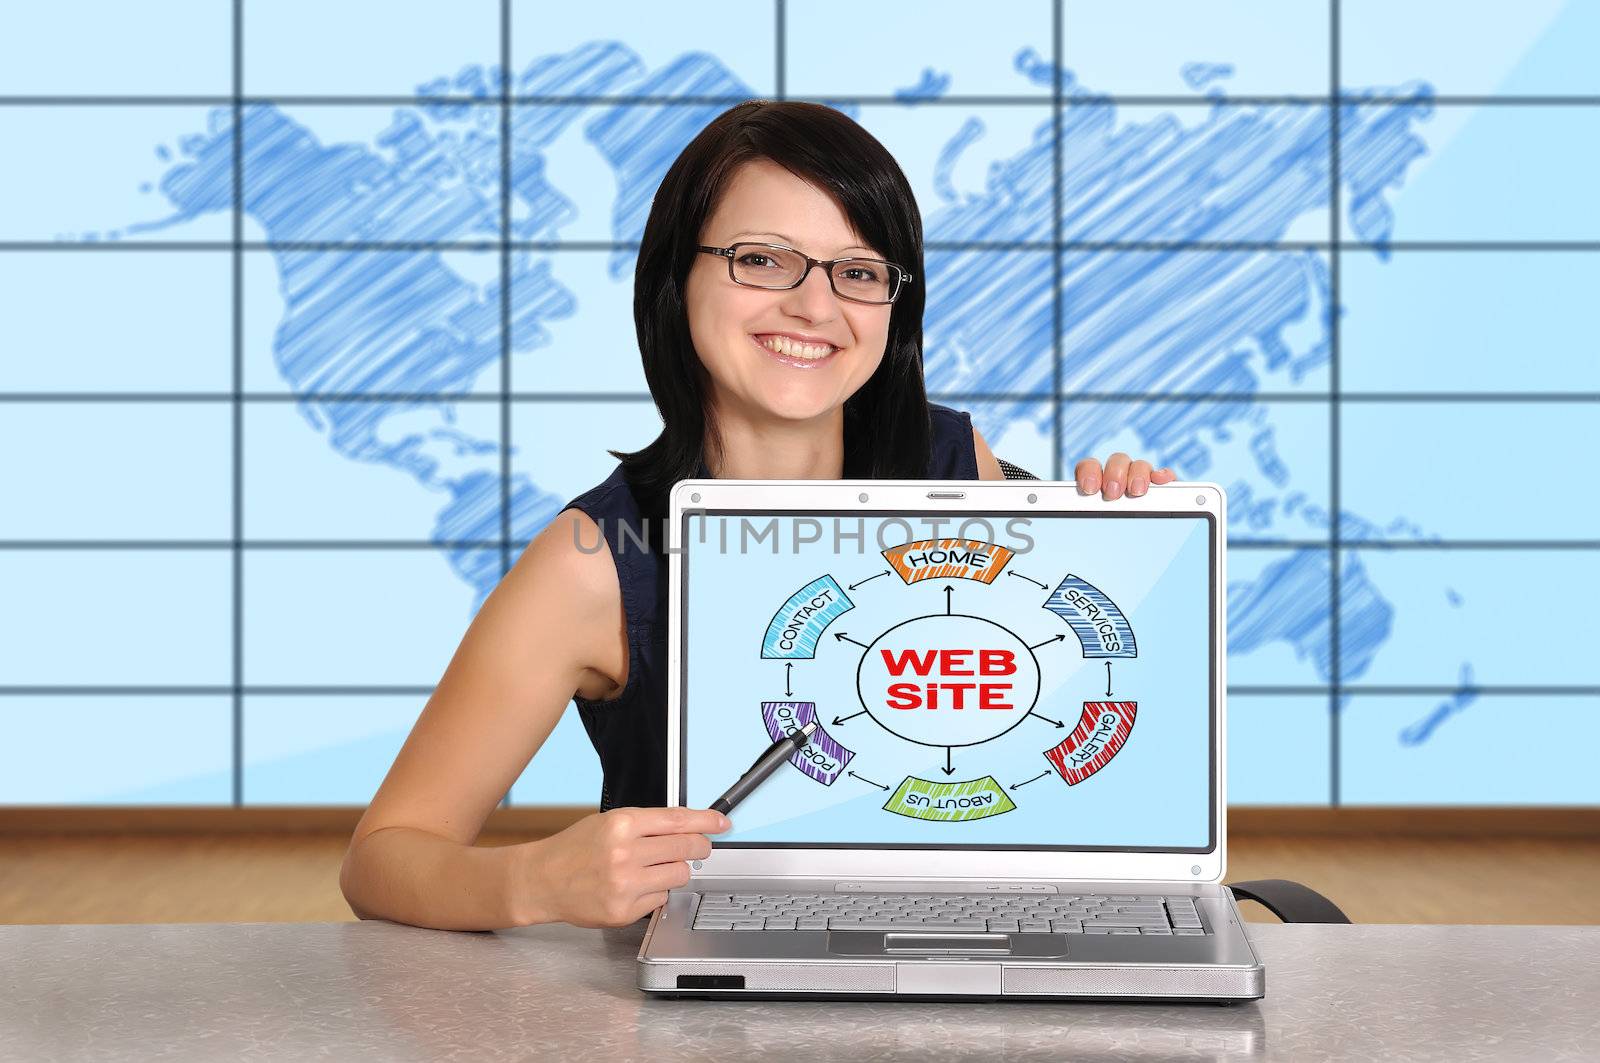 woman with laptop and web site on screen